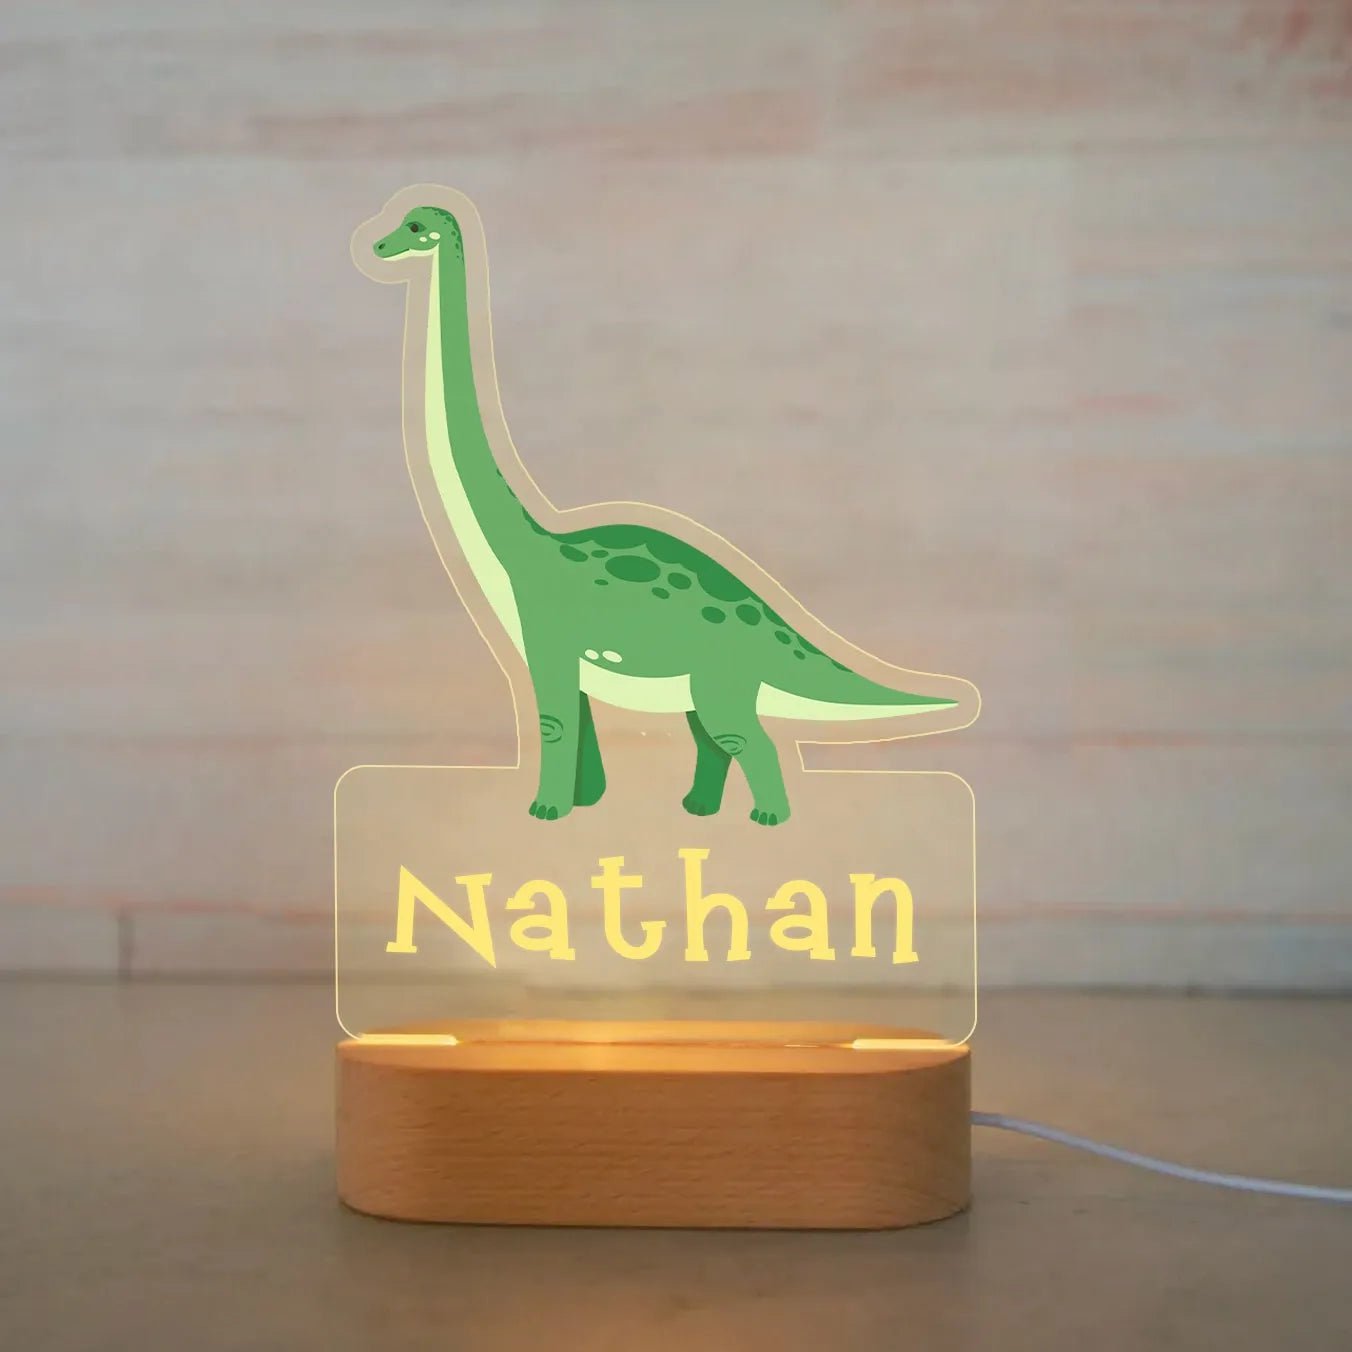 Customized Animal-themed Night Light for Kids - Personalized with Child's Name, Acrylic Lamp for Bedroom Decor Warm Light / 19Dinosaur